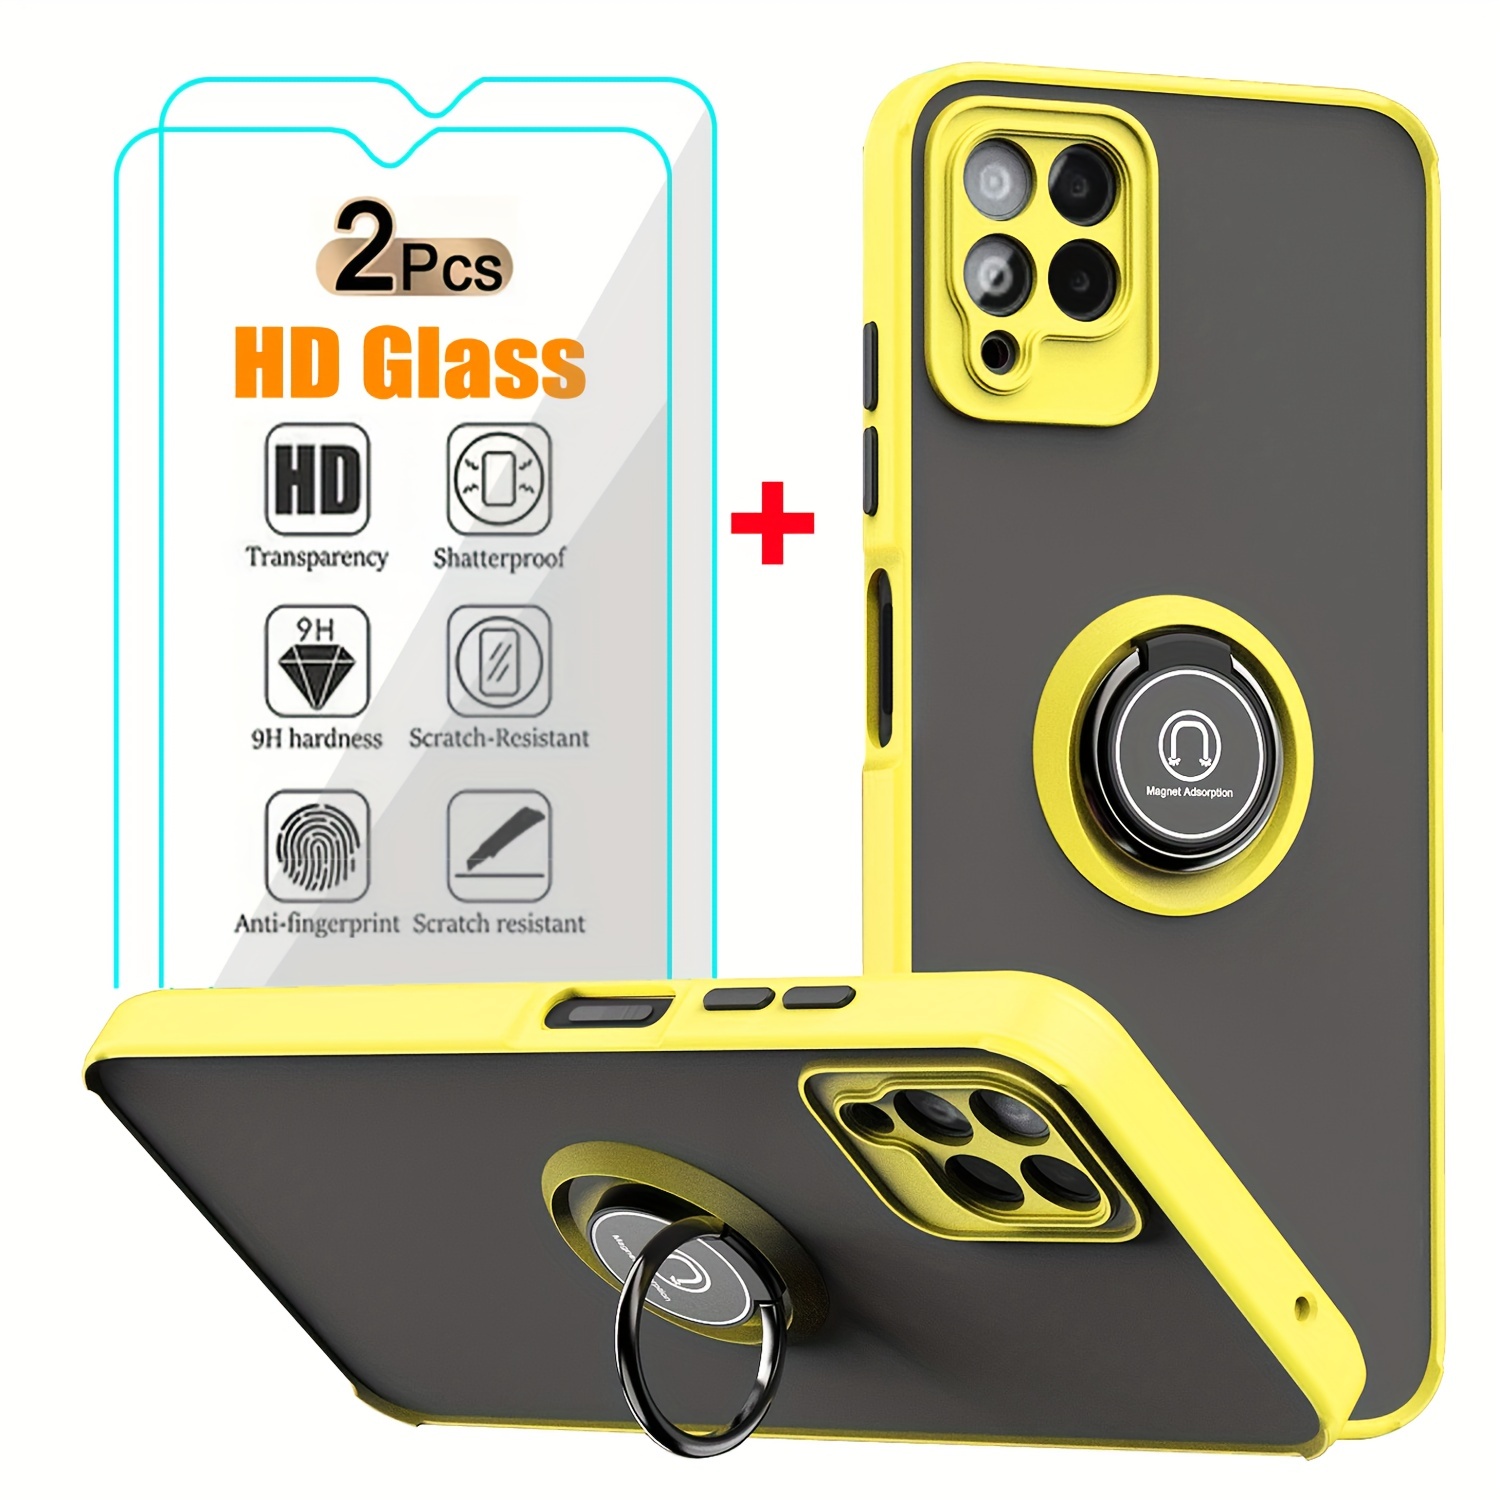 Honor 90 5G Case 360 Full Protection Clear Tempered Glass Front Hard Cover  with Back PU Leather Case for Honor 90 Honor90 5G